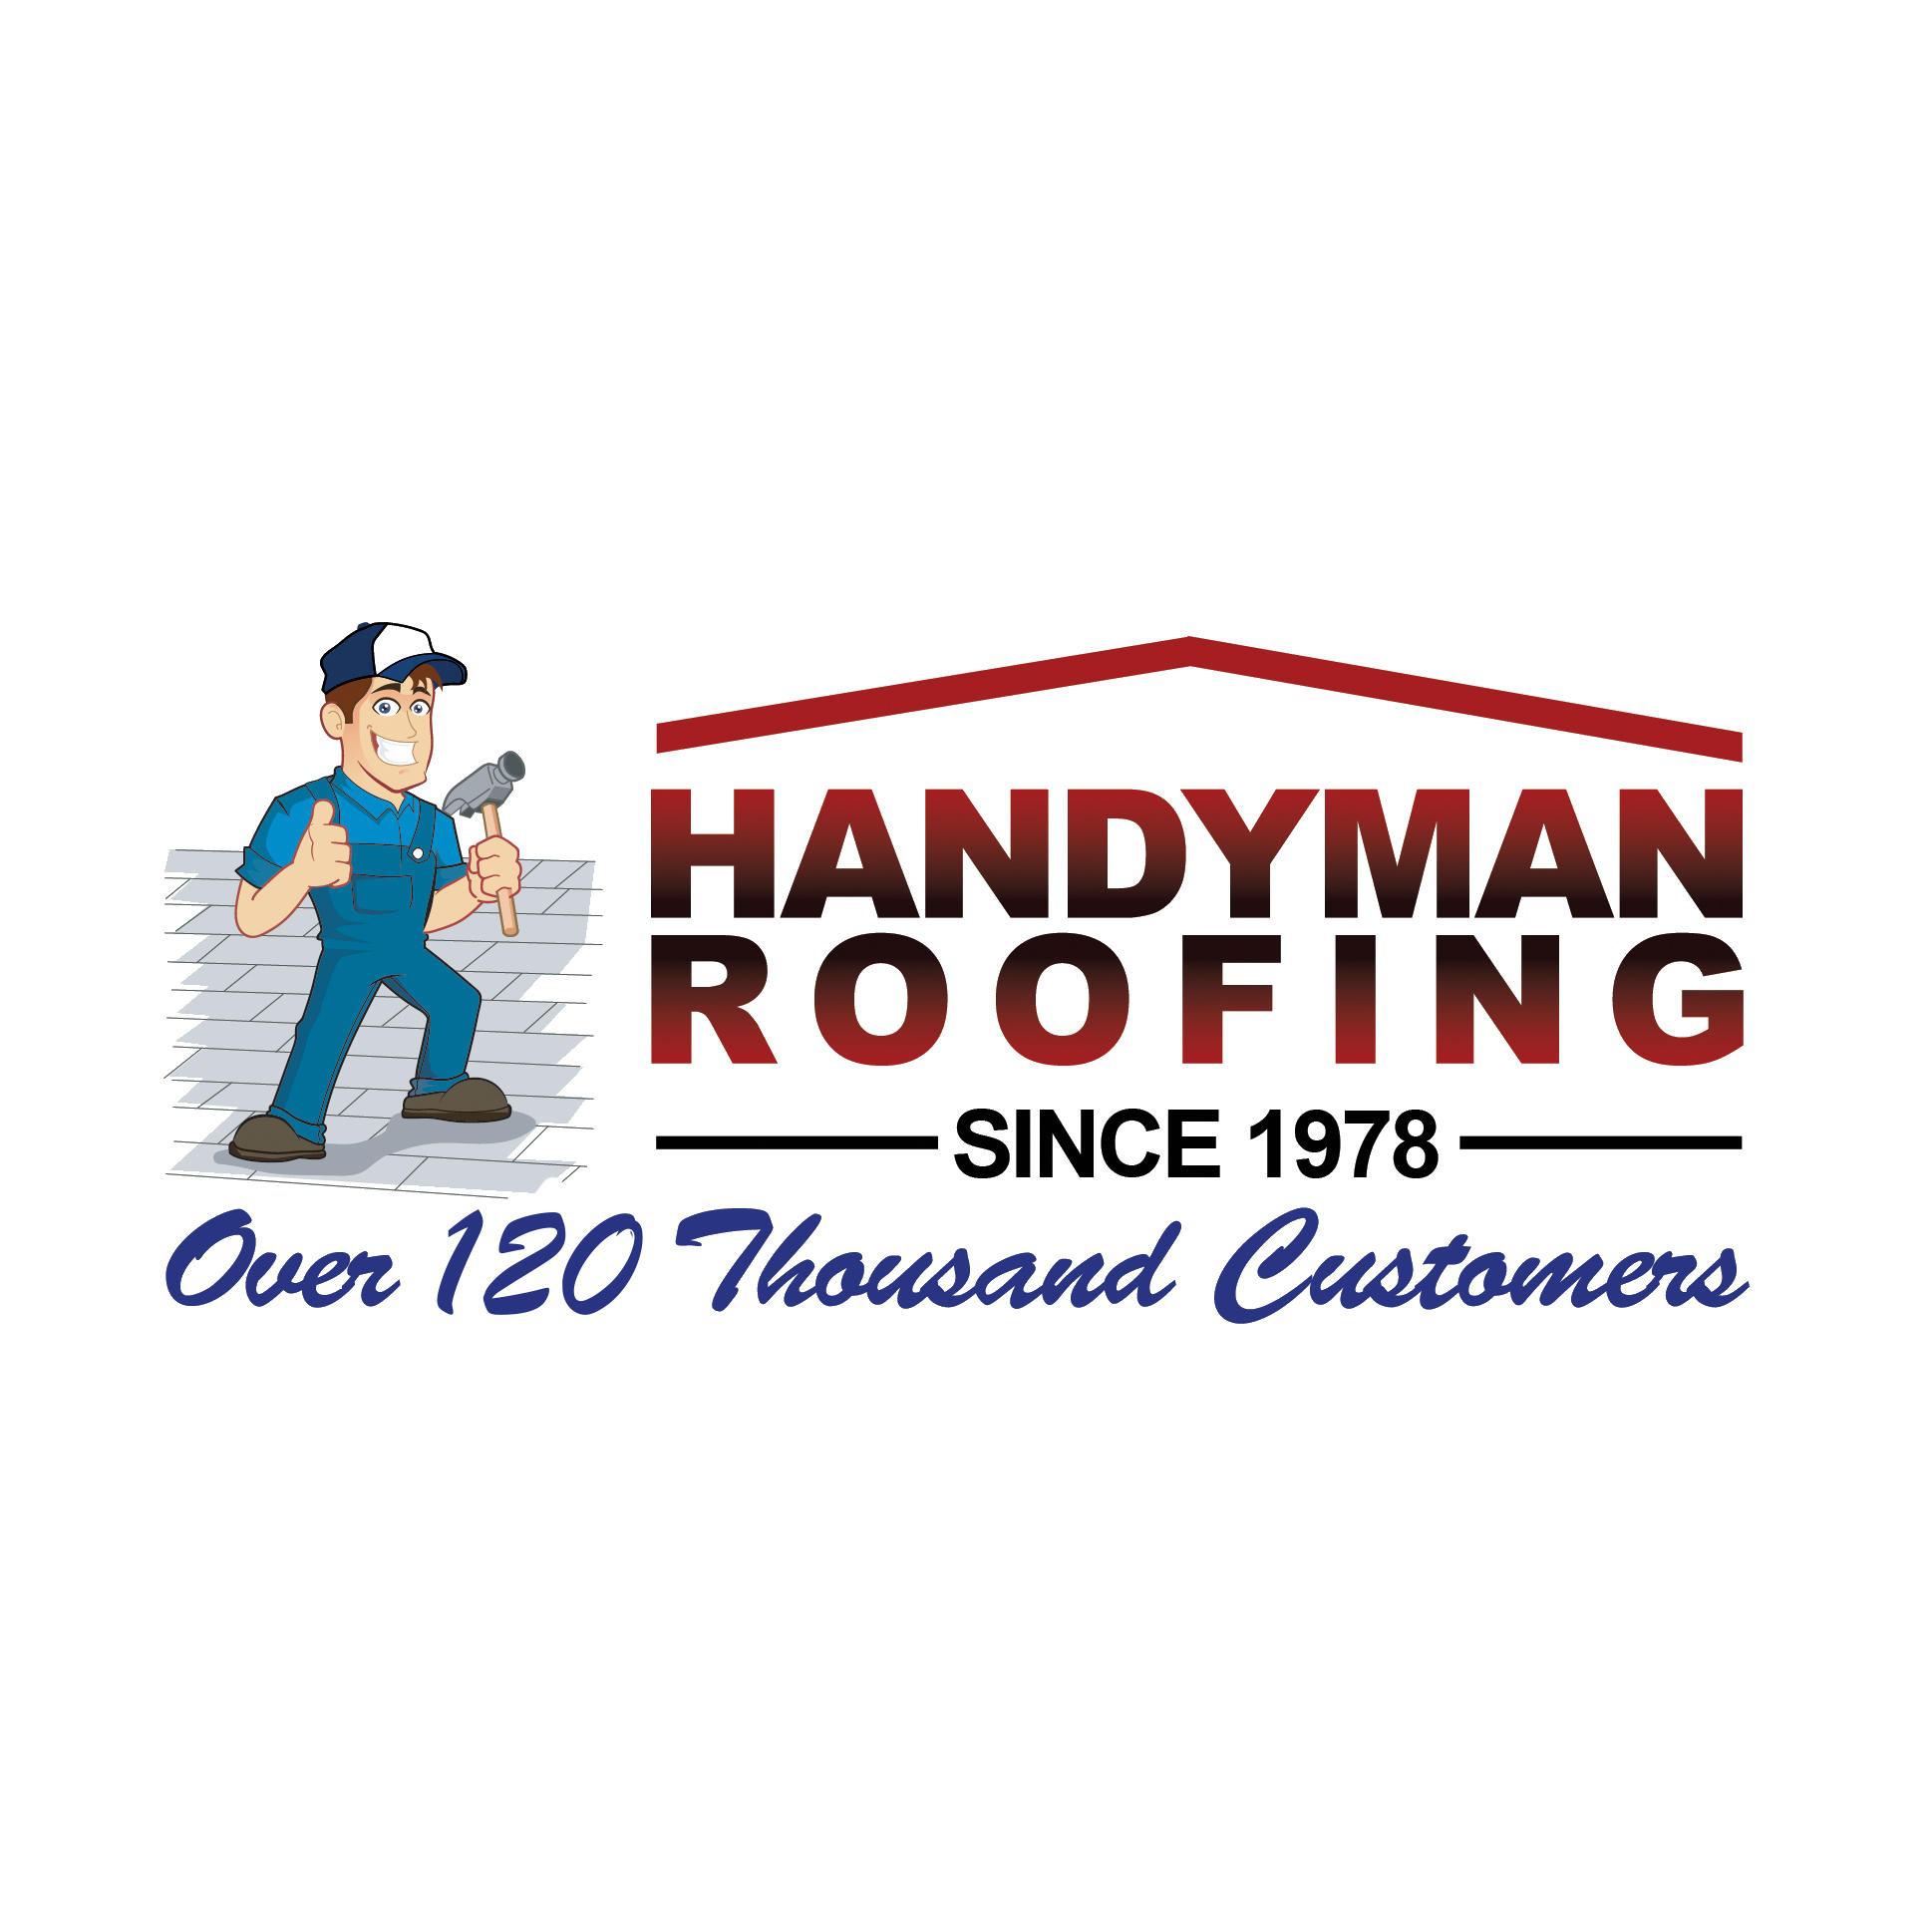 Voted #1 Roofing Contractor in Central and Southwest FL Handyman Roofing Orlando (407)839-1430